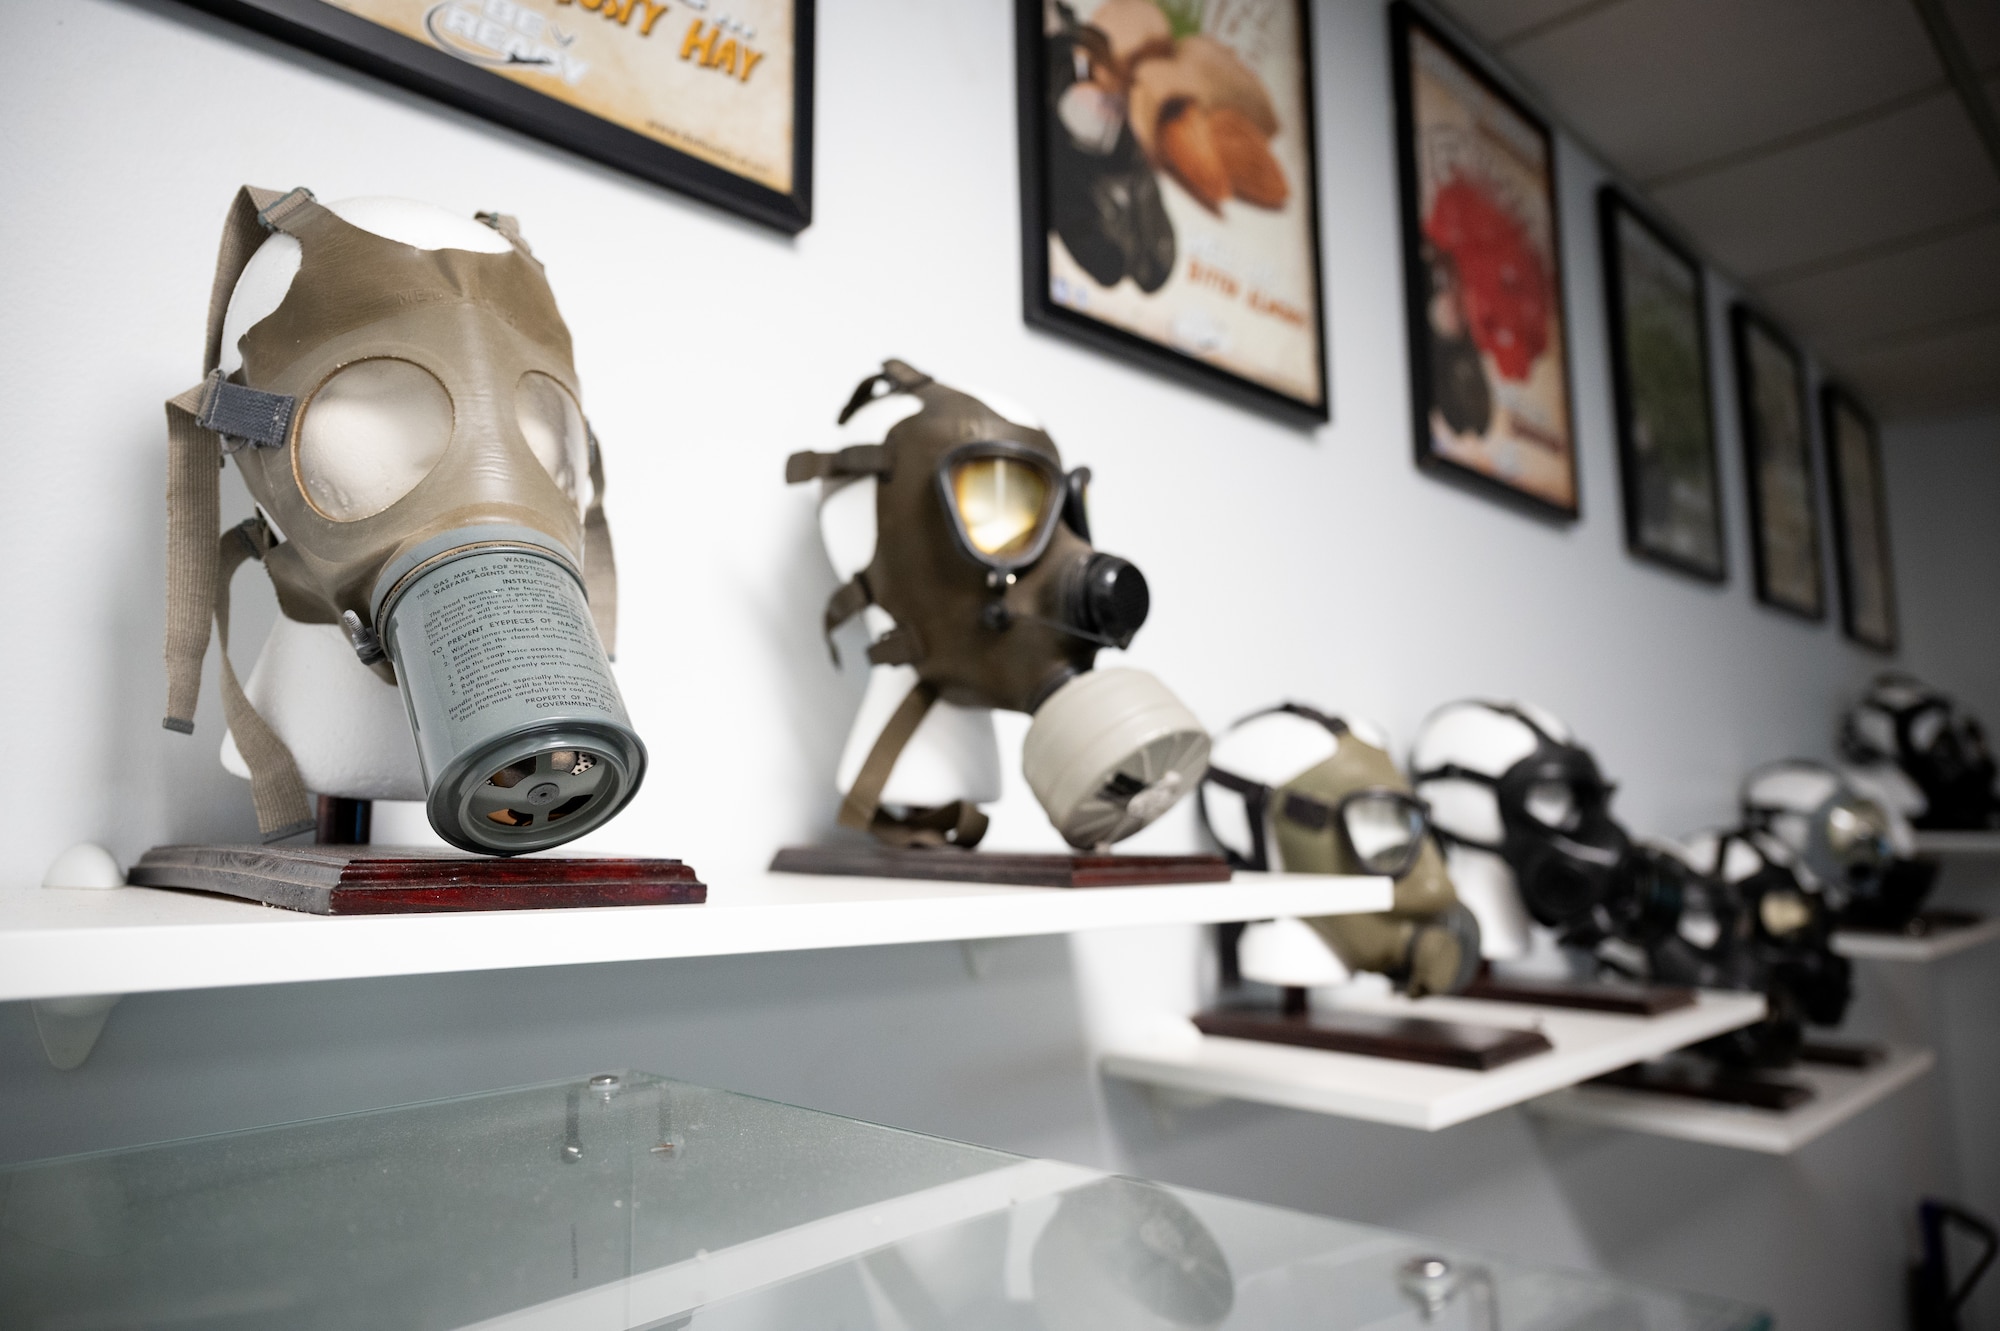 Protective masks are displayed on a shelf.